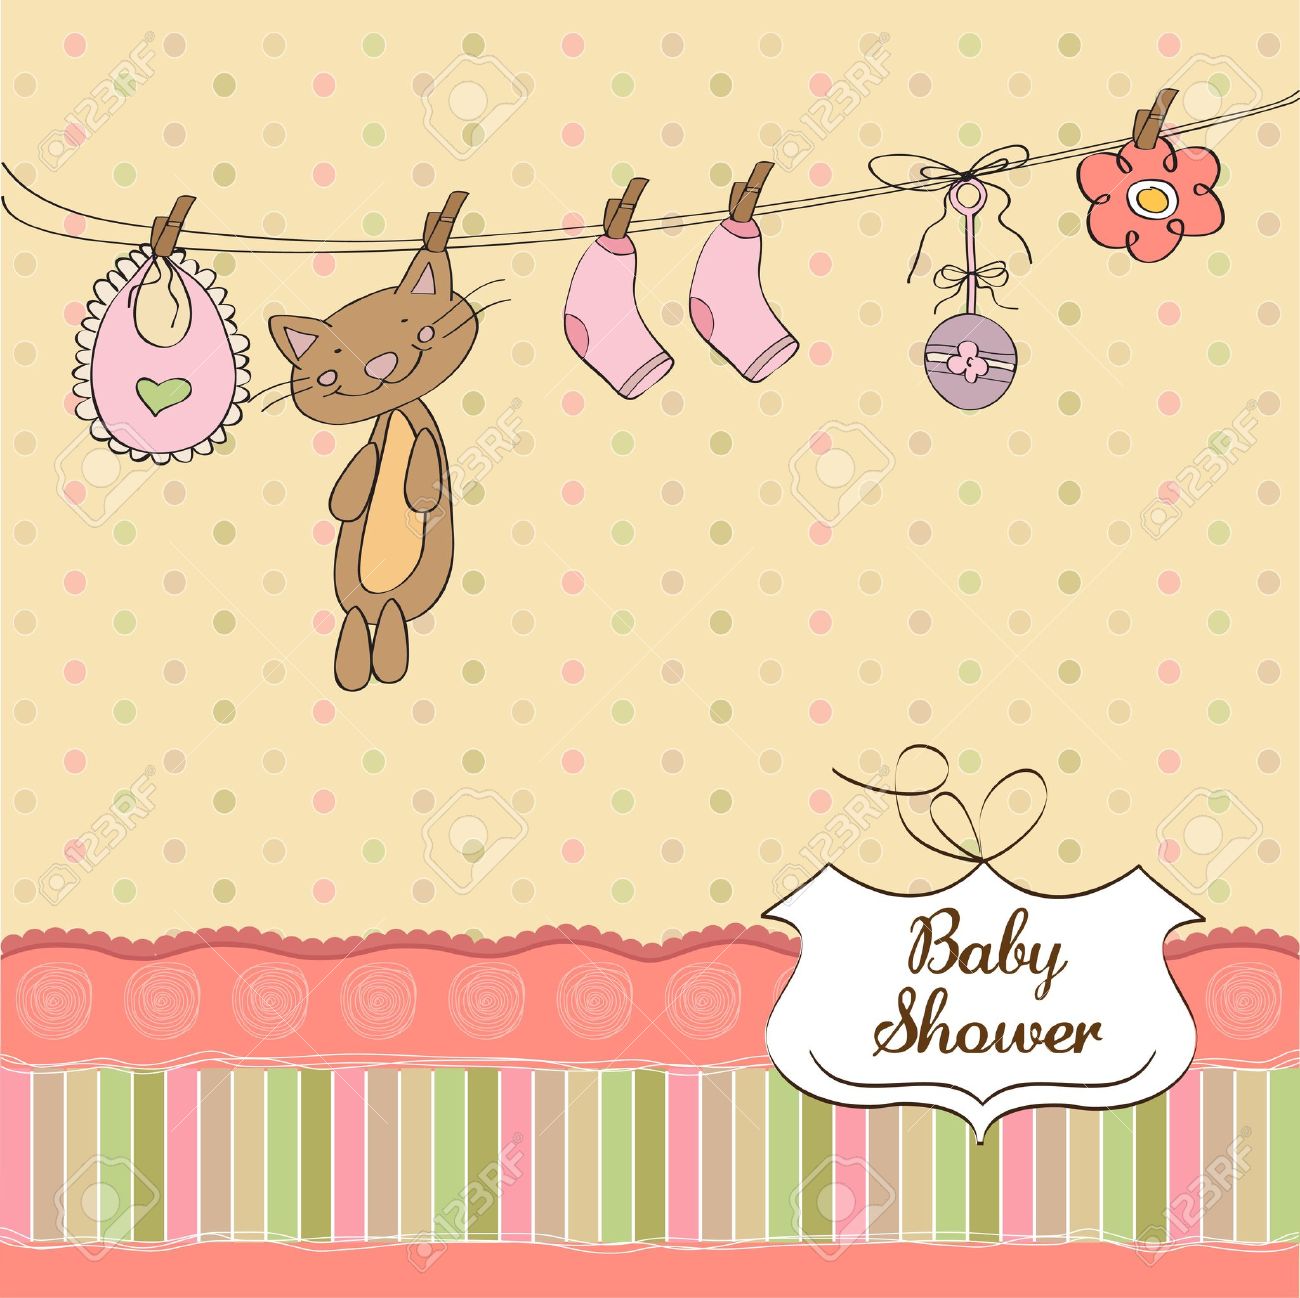 Full Size of Baby Shower:nursery Themes Elegant Baby Shower Unique Baby Shower Decorations Pinterest Baby Shower Ideas For Girls Baby Shower Ideas Baby Shower Decorations Cheap Invitations Baby Shower Pinterest Nursery Ideas Baby Shower Invitations For Boys